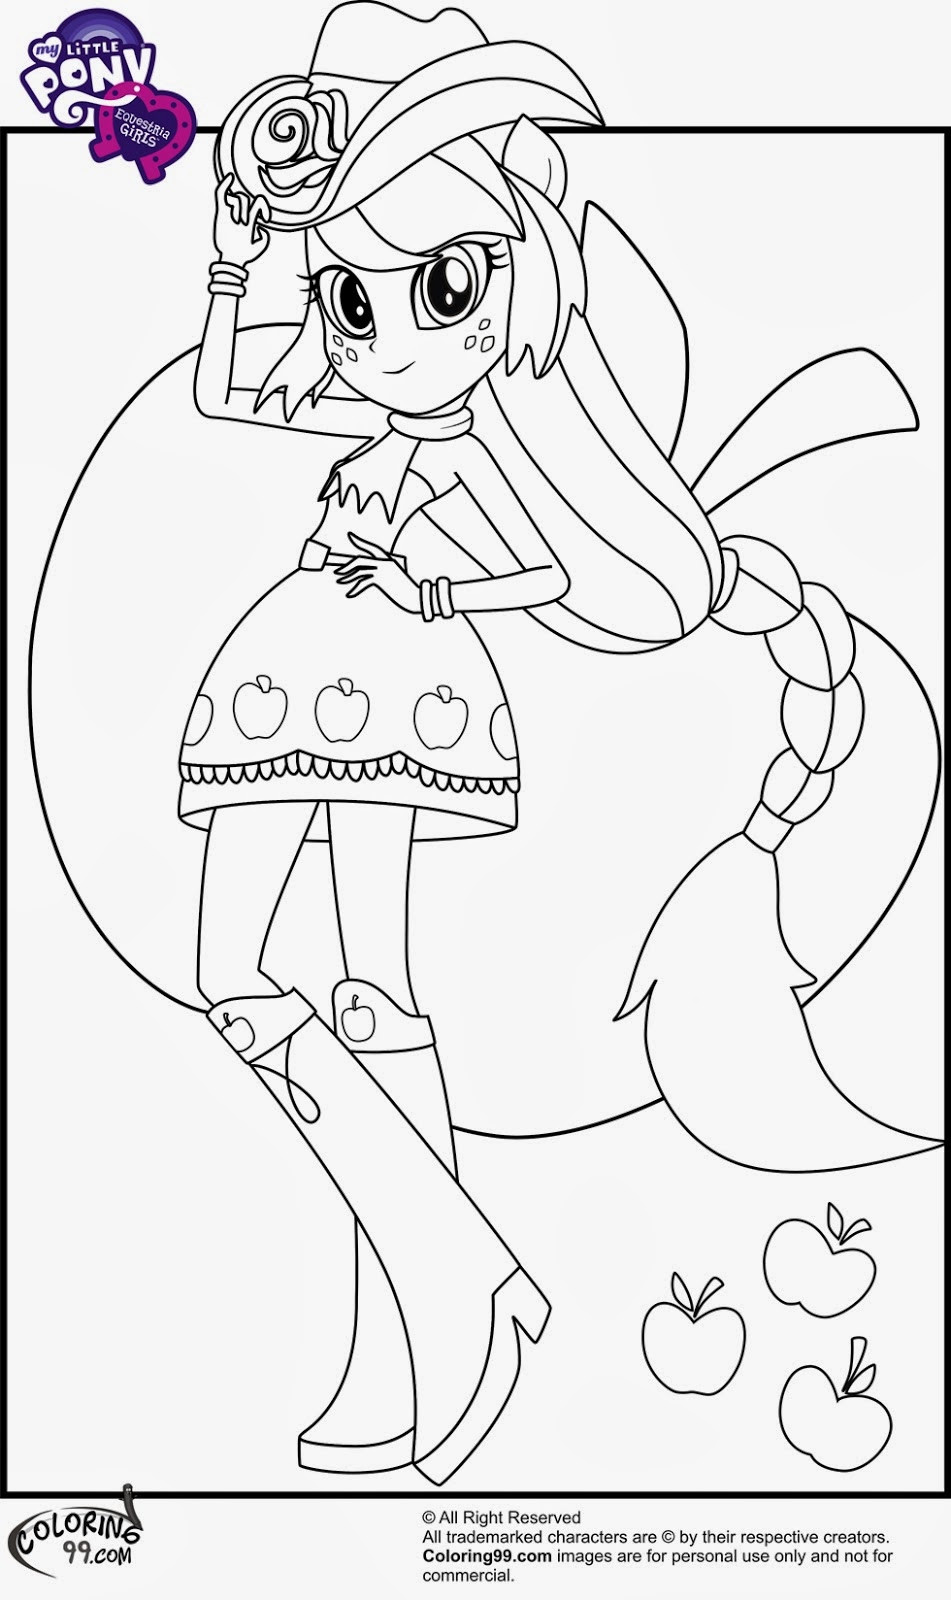 Coloring Pages Equestria Girls
 My Little Pony Equestria Girls Blog ¡¡Imágenes para